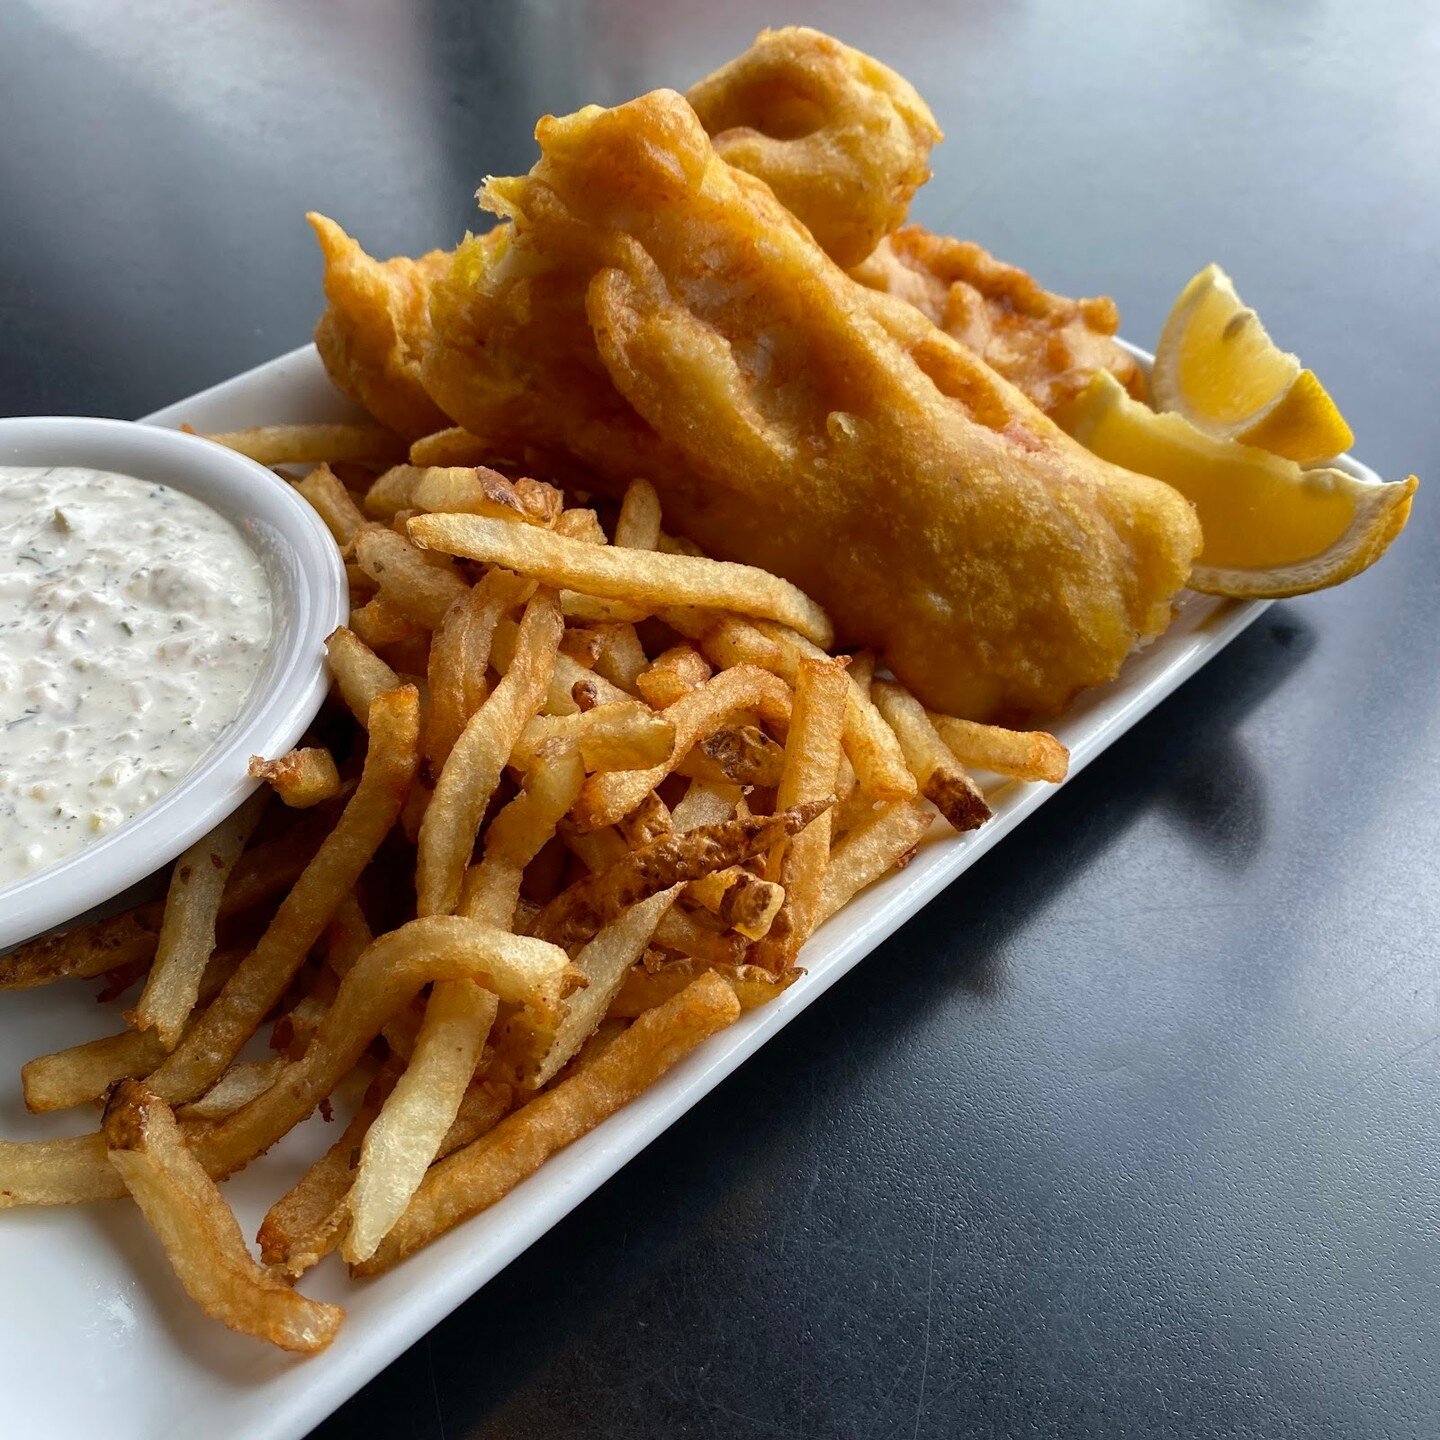 Fridays are for Beer Battered Fish &amp; Chips &mdash; available for a limited time only! 🍟🍻

#24Diner #DowntownAustinTx #CentralAustin #EaterAtx #FishNChips #LimtedTimeOnly #FishFriday